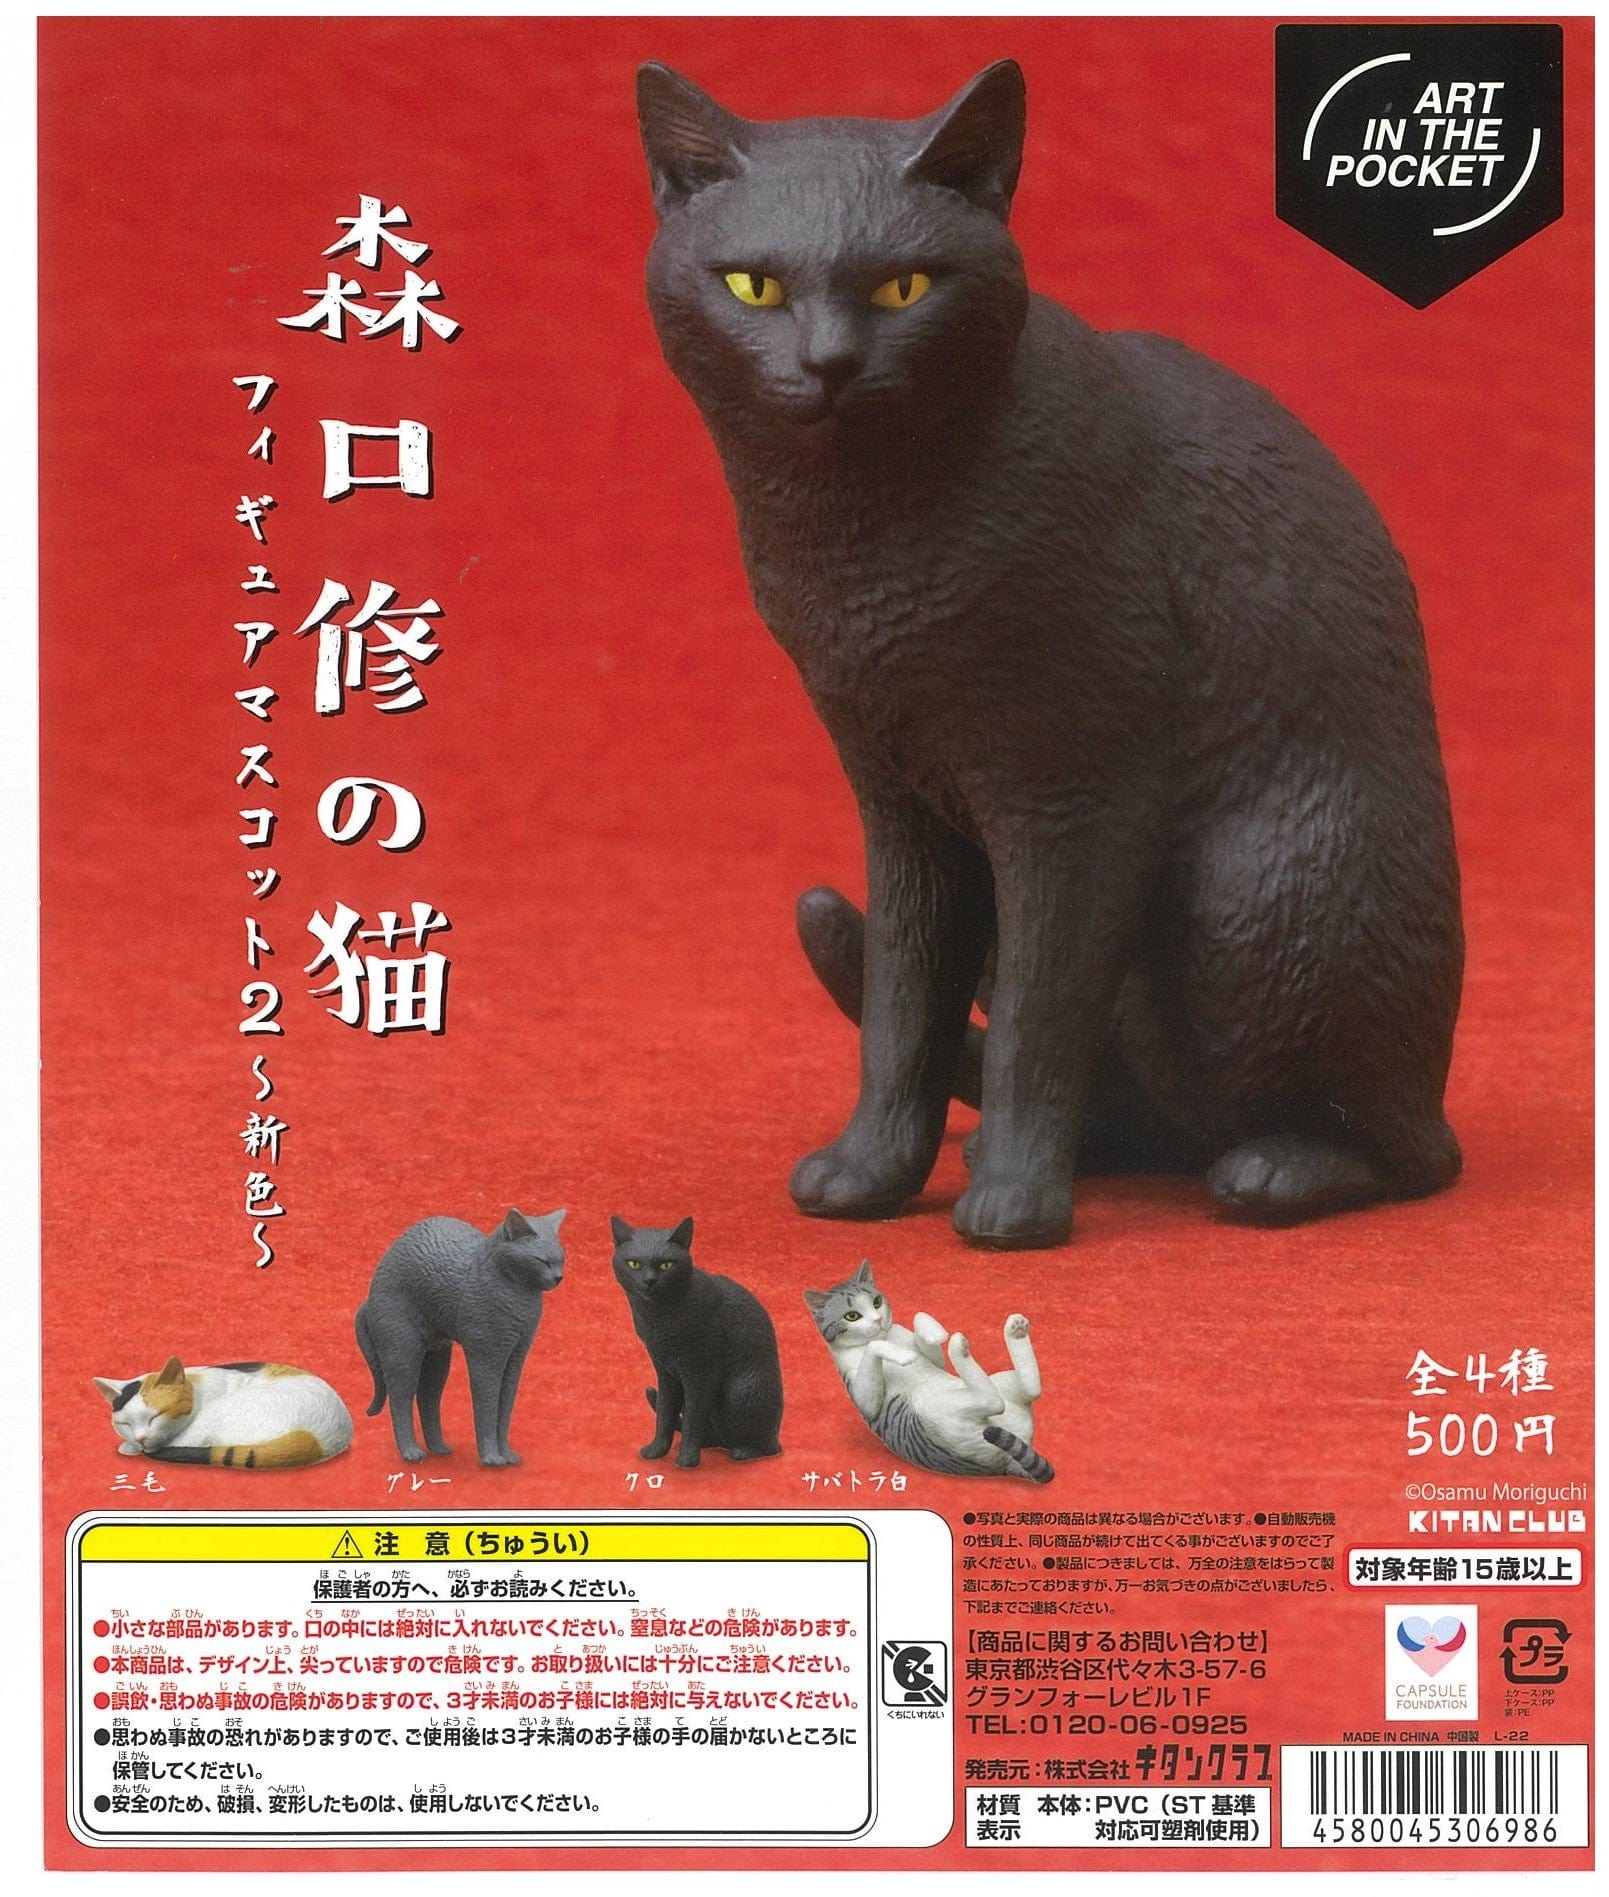 Art In The Pocket CP2135 Art In The Pocket Series Cats of Osamu Moriguchi Figure Mascot 2 New Color